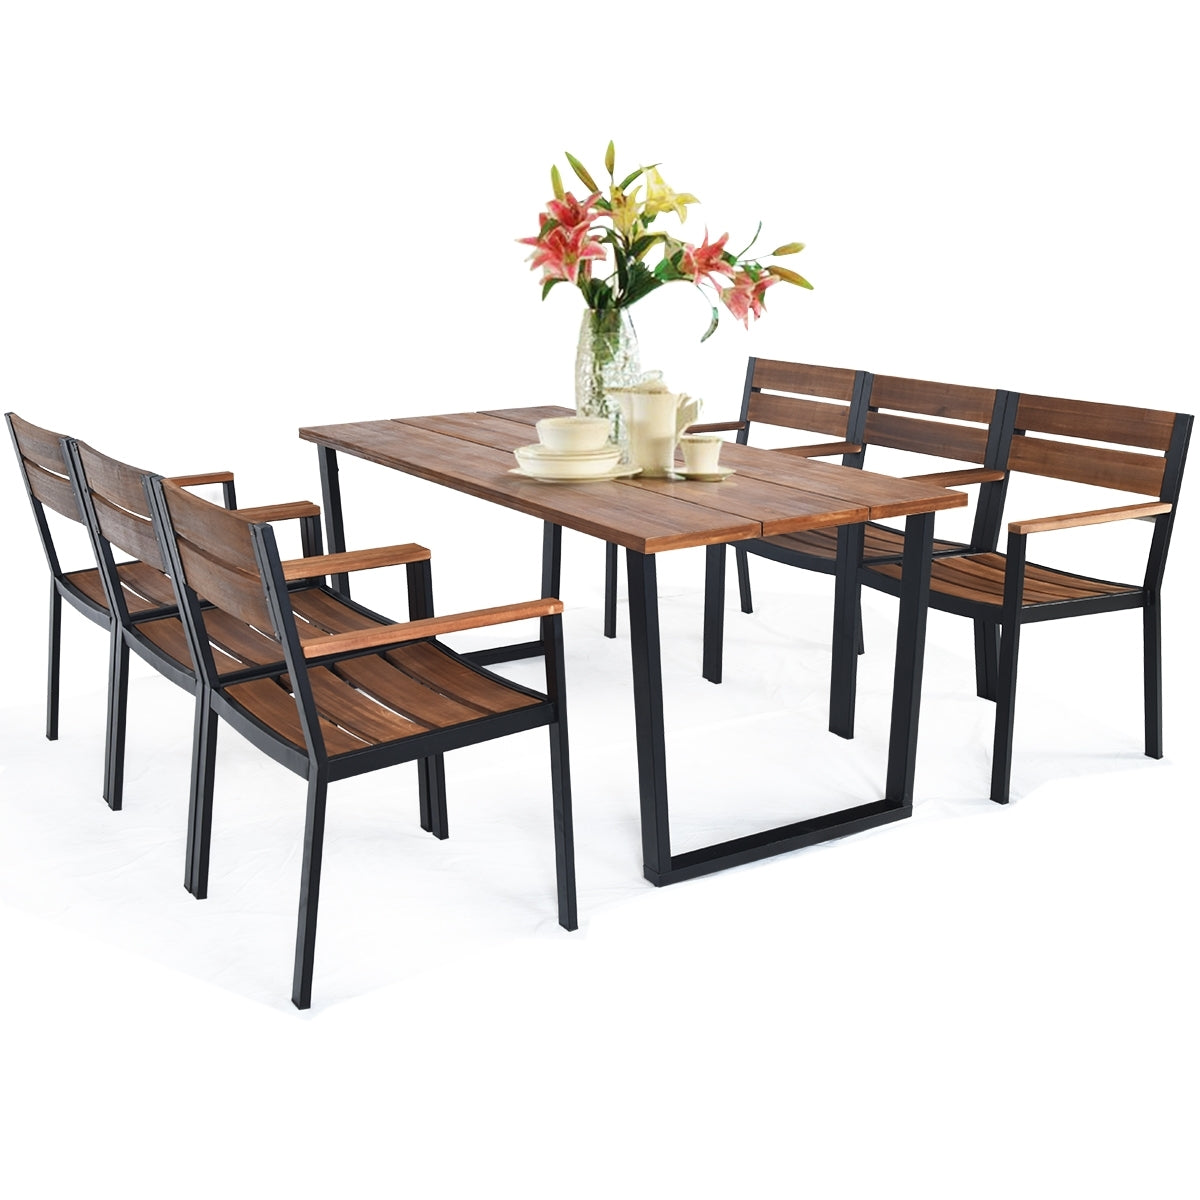 Patented 7 Pieces Patented Outdoor Patio Dining Table Set with Hole